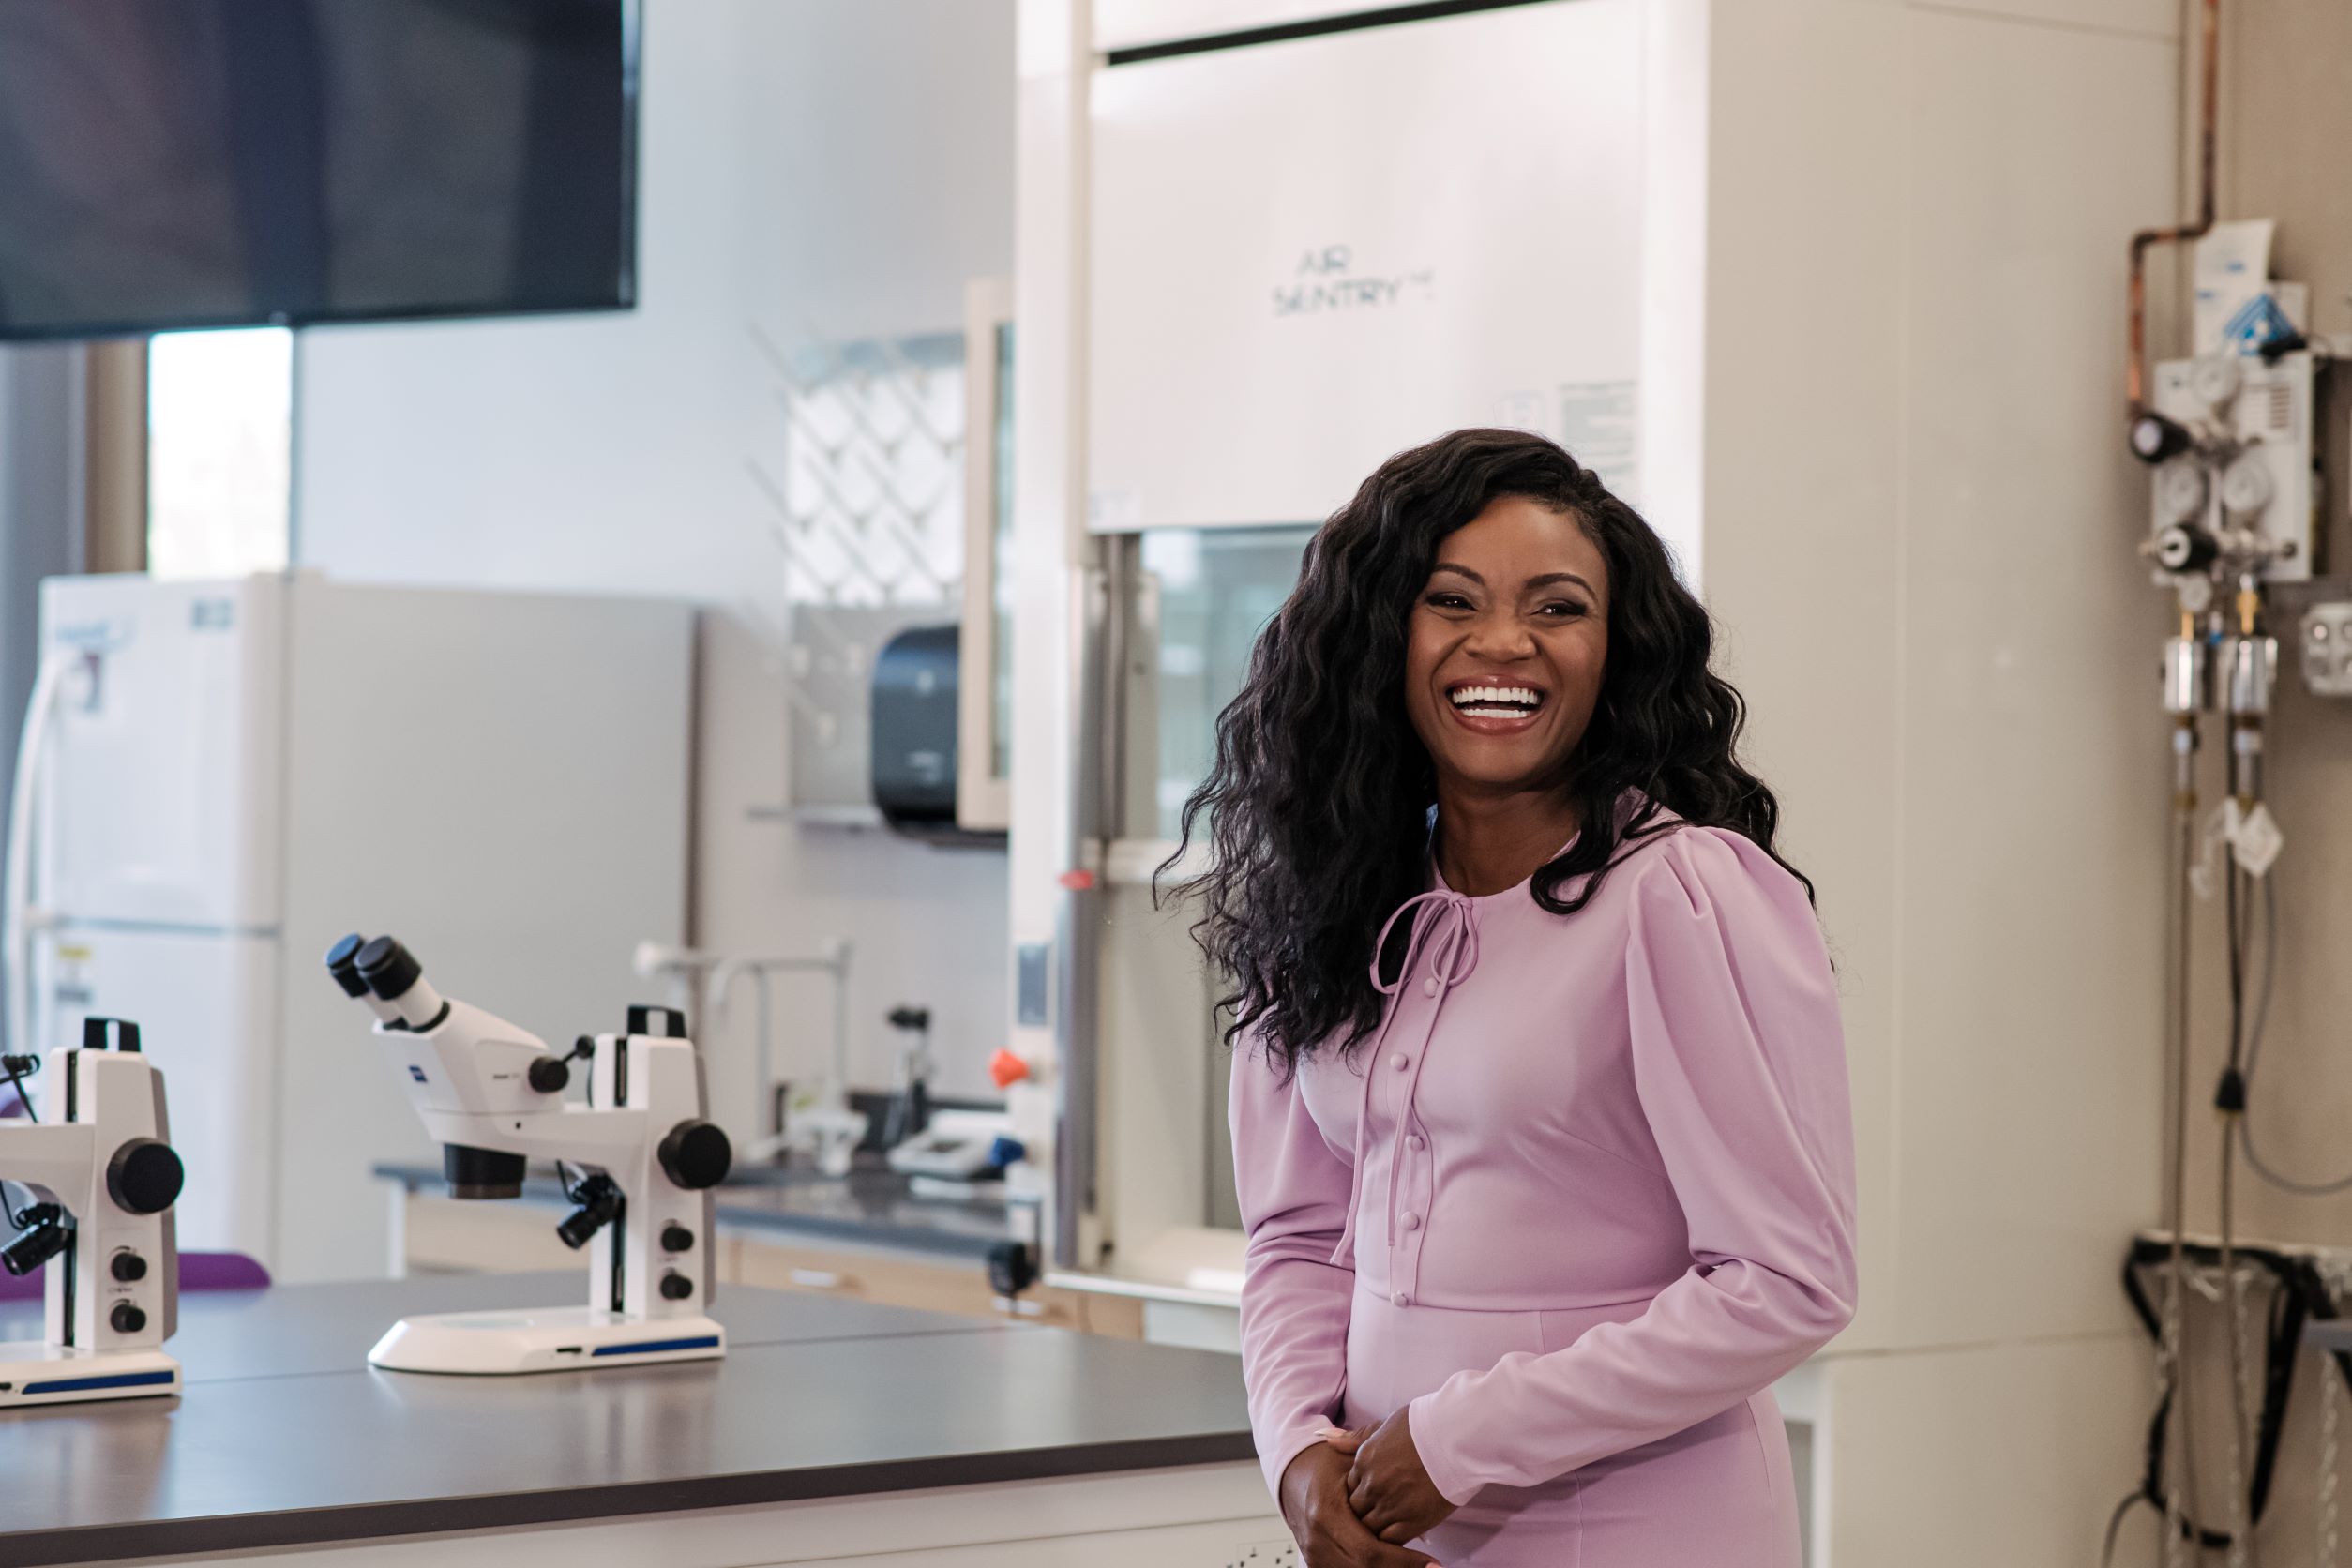 Black woman with long, curly hair smiles while standing next to microscopes in a lab.